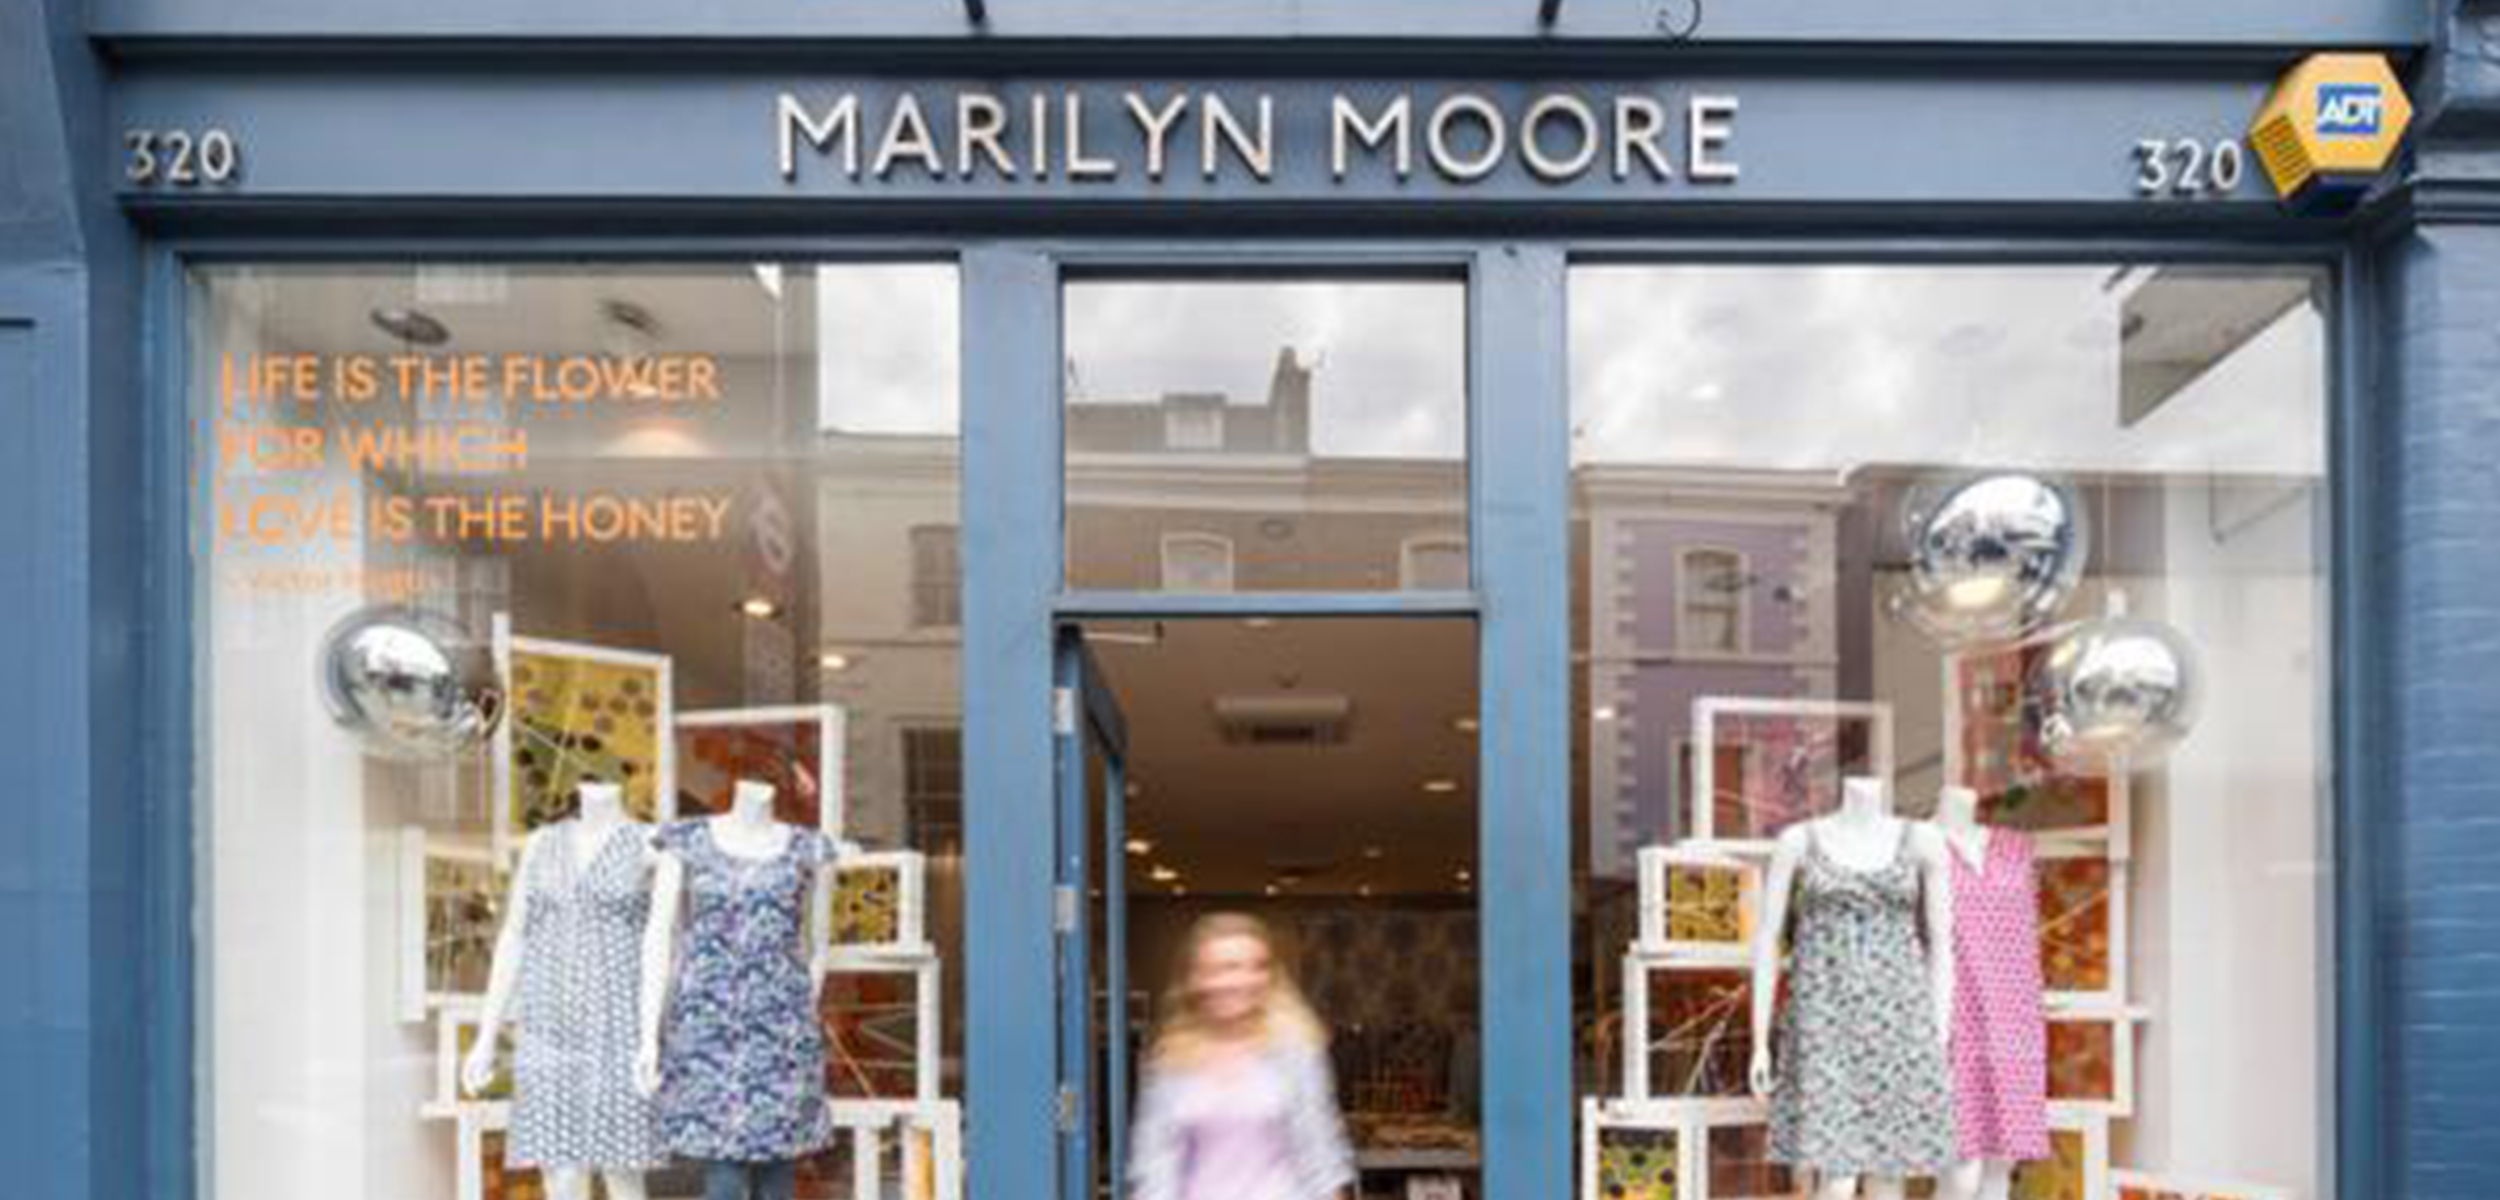 Marilyn Moore creates a Buzz in Chelsea